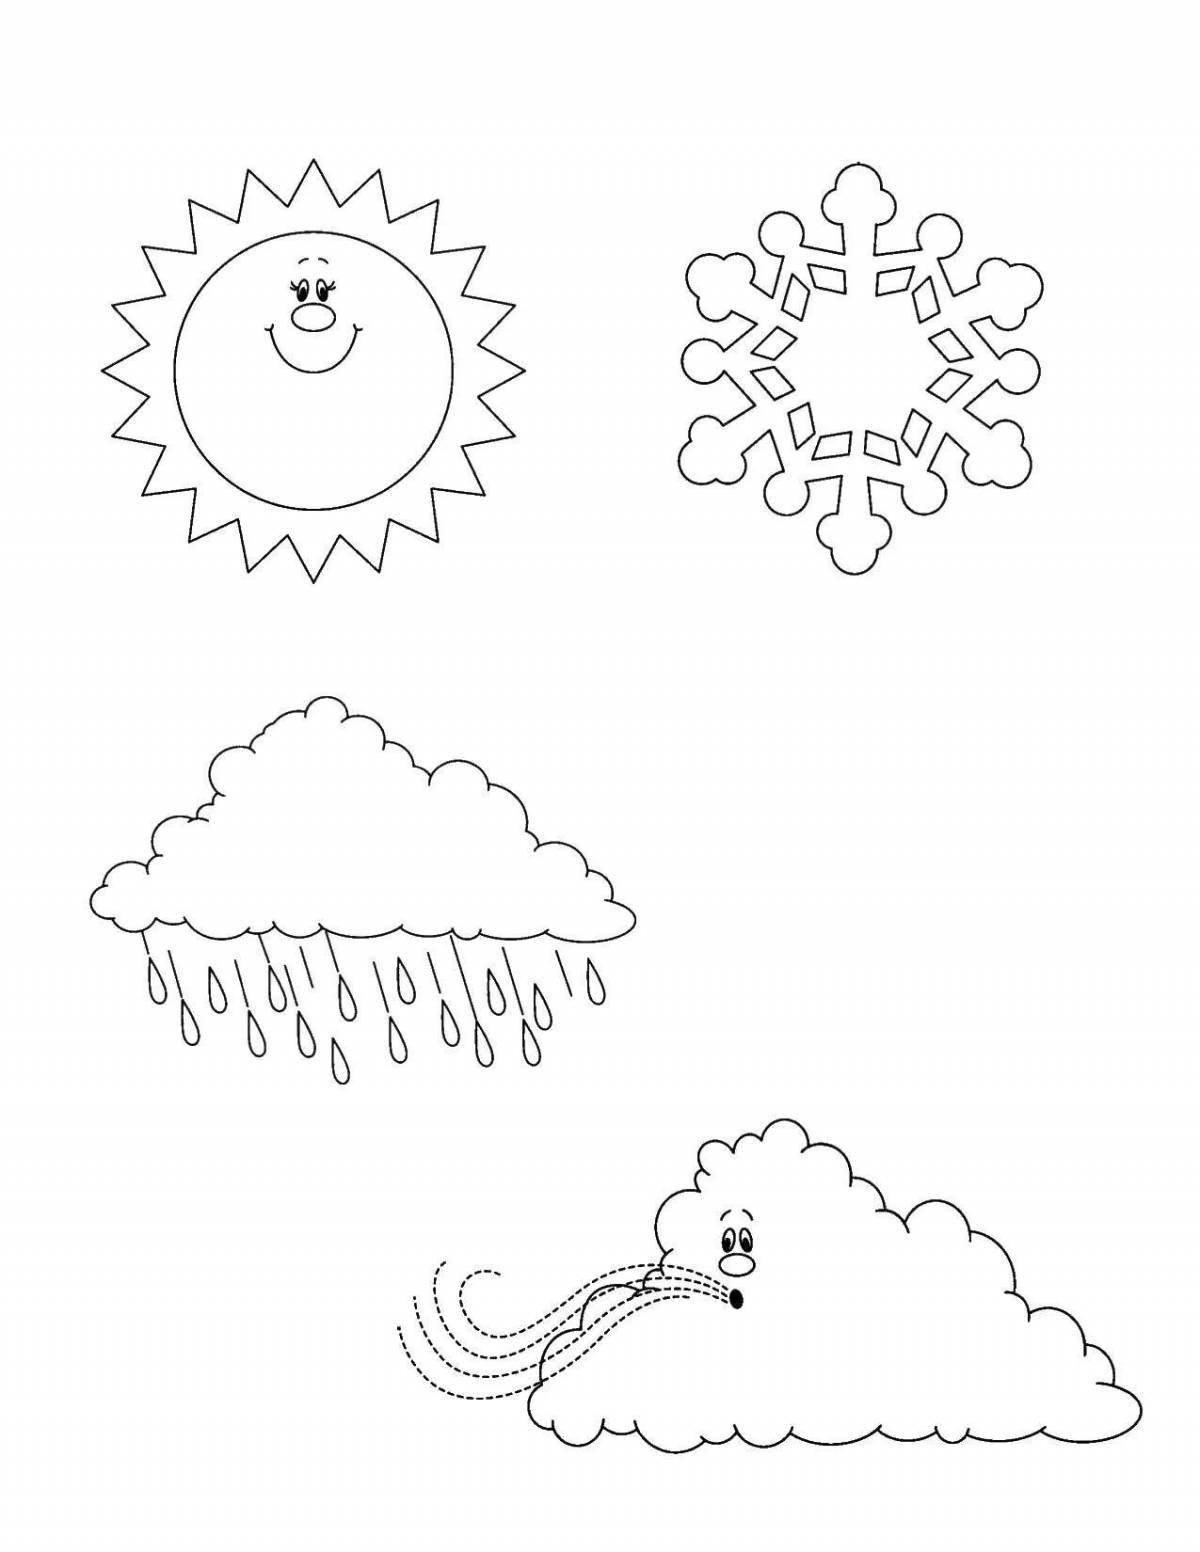 Sunny weather forecast coloring page